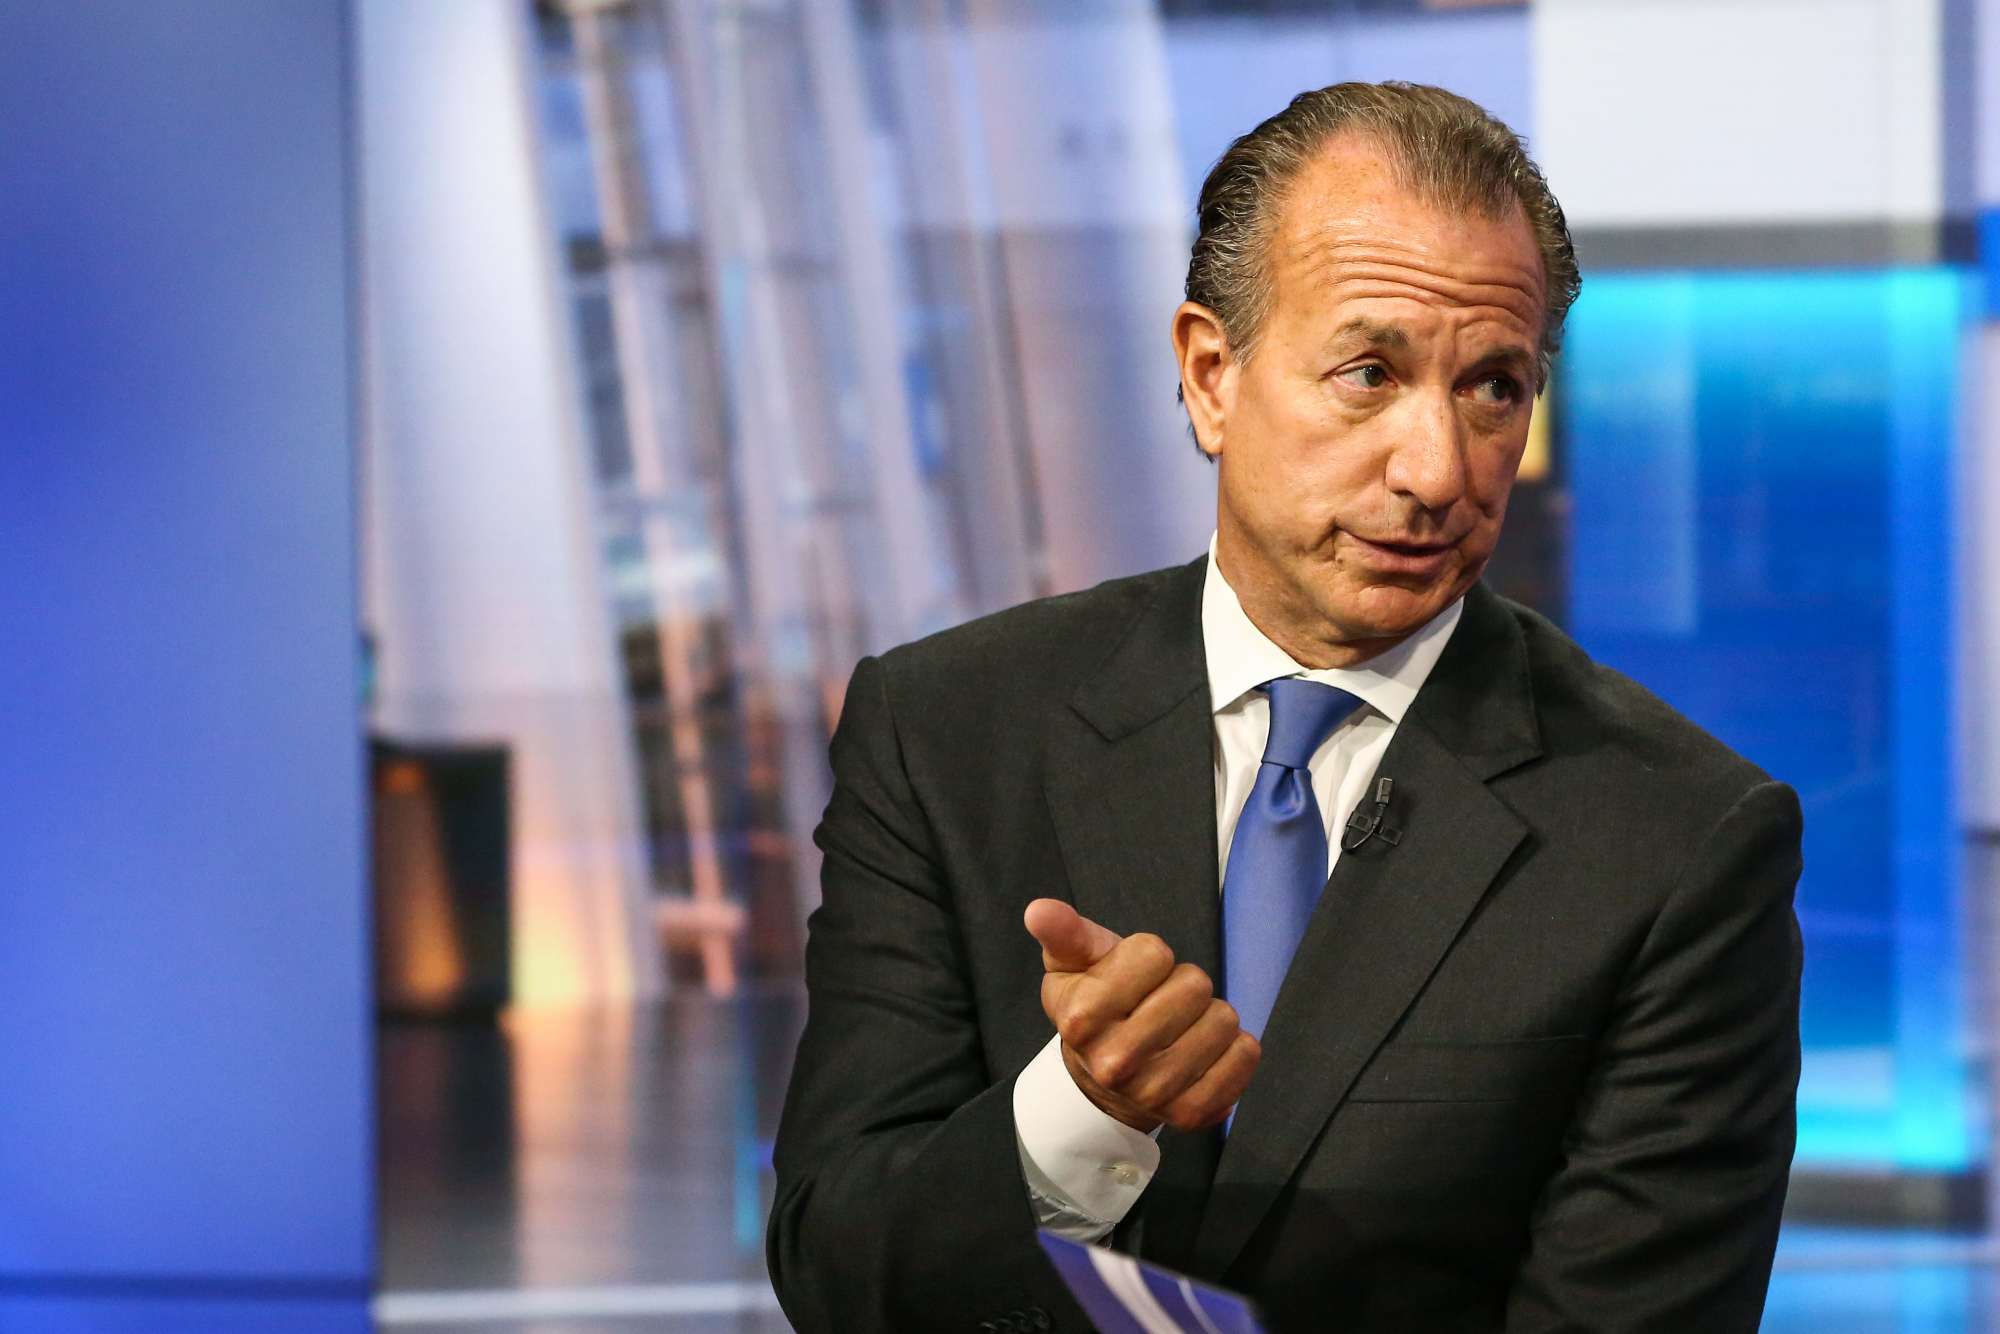 Jim Zenni, president and chief executive officer of Z Capital Partners, speaks during a Bloomberg Television interview in New York, U.S., on Monday, Aug. 8, 2016. Zenni weighed in on the markets and the economy, and discussed his investment thoughts.